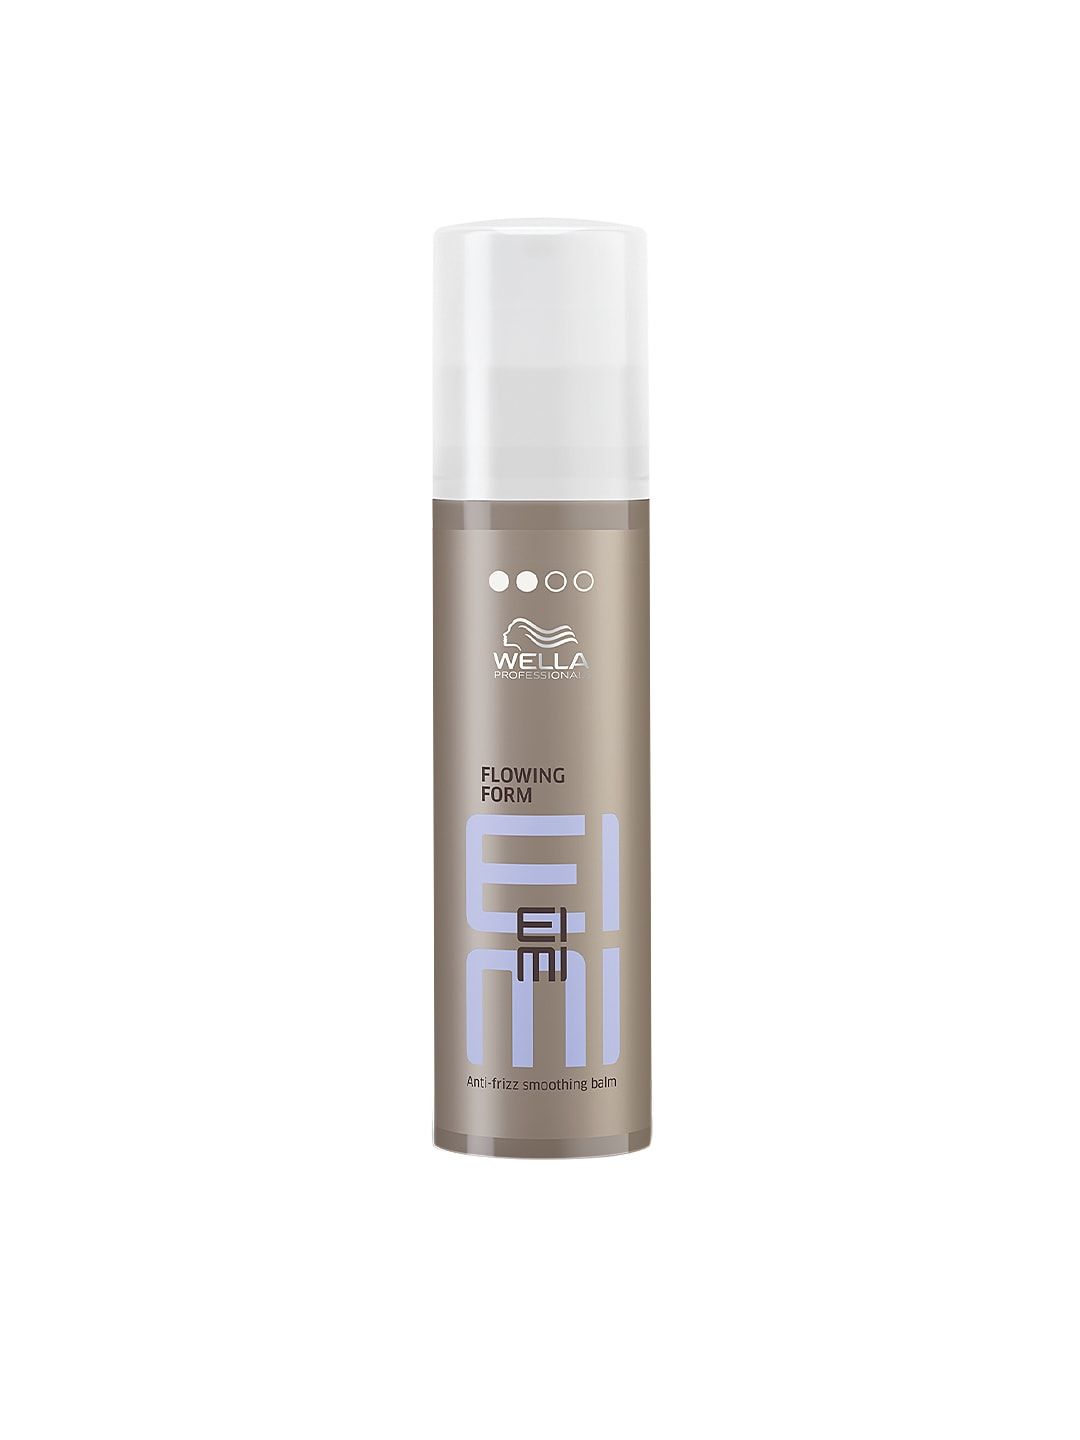 WELLA PROFESSIONALS Flowing Form EIMI Anti-Frizz Smoothening Balm 100 ml Price in India